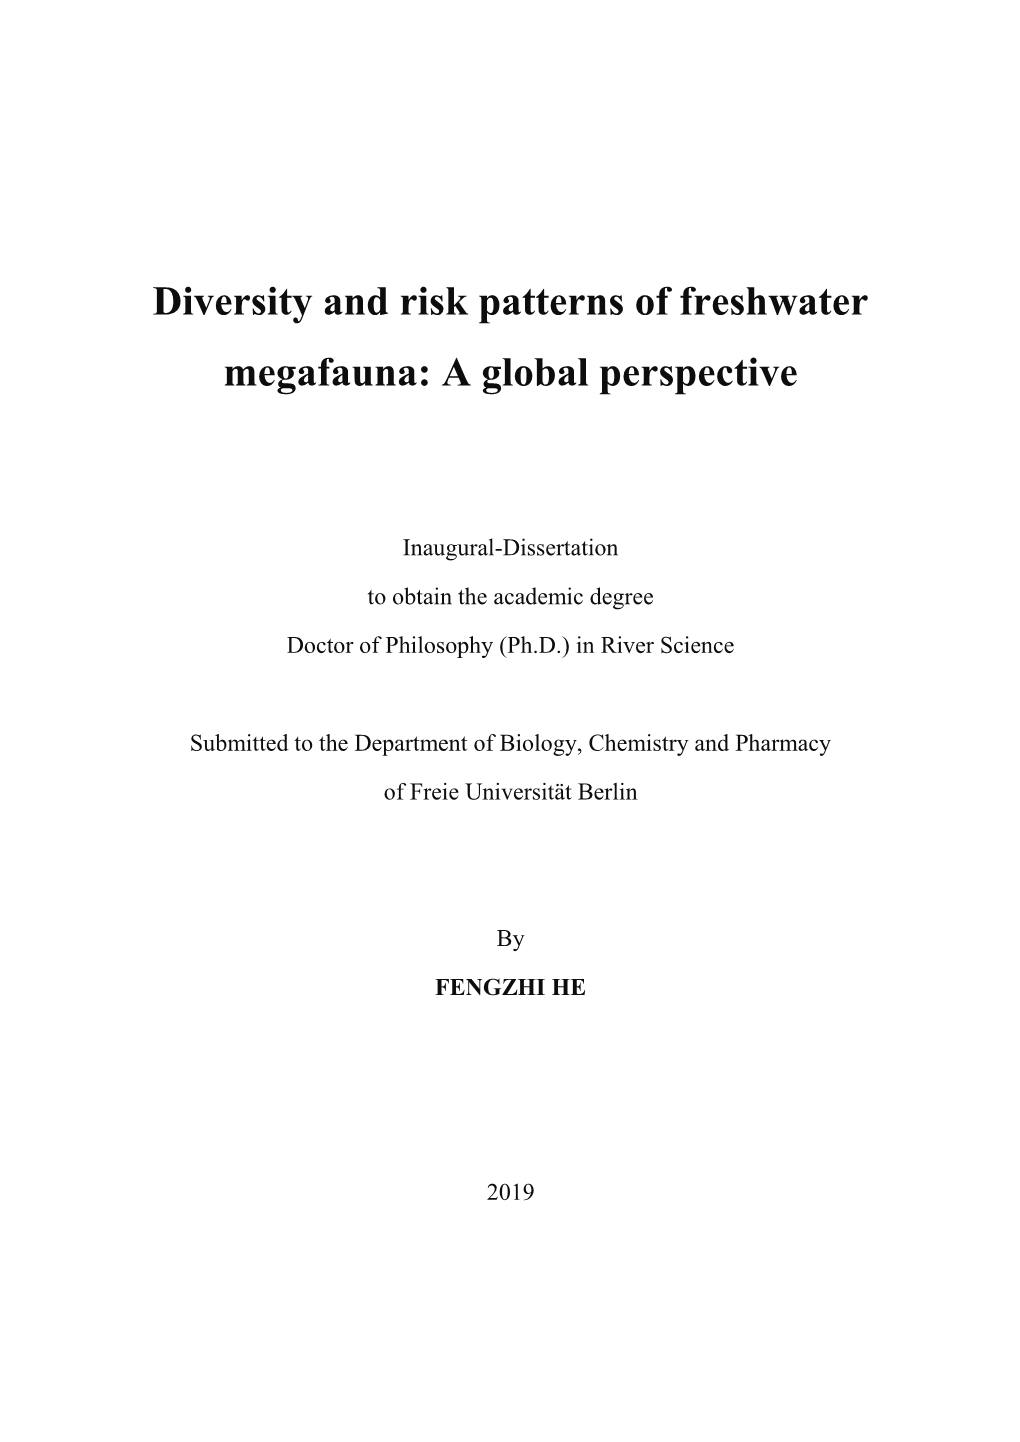 Diversity and Risk Patterns of Freshwater Megafauna: a Global Perspective